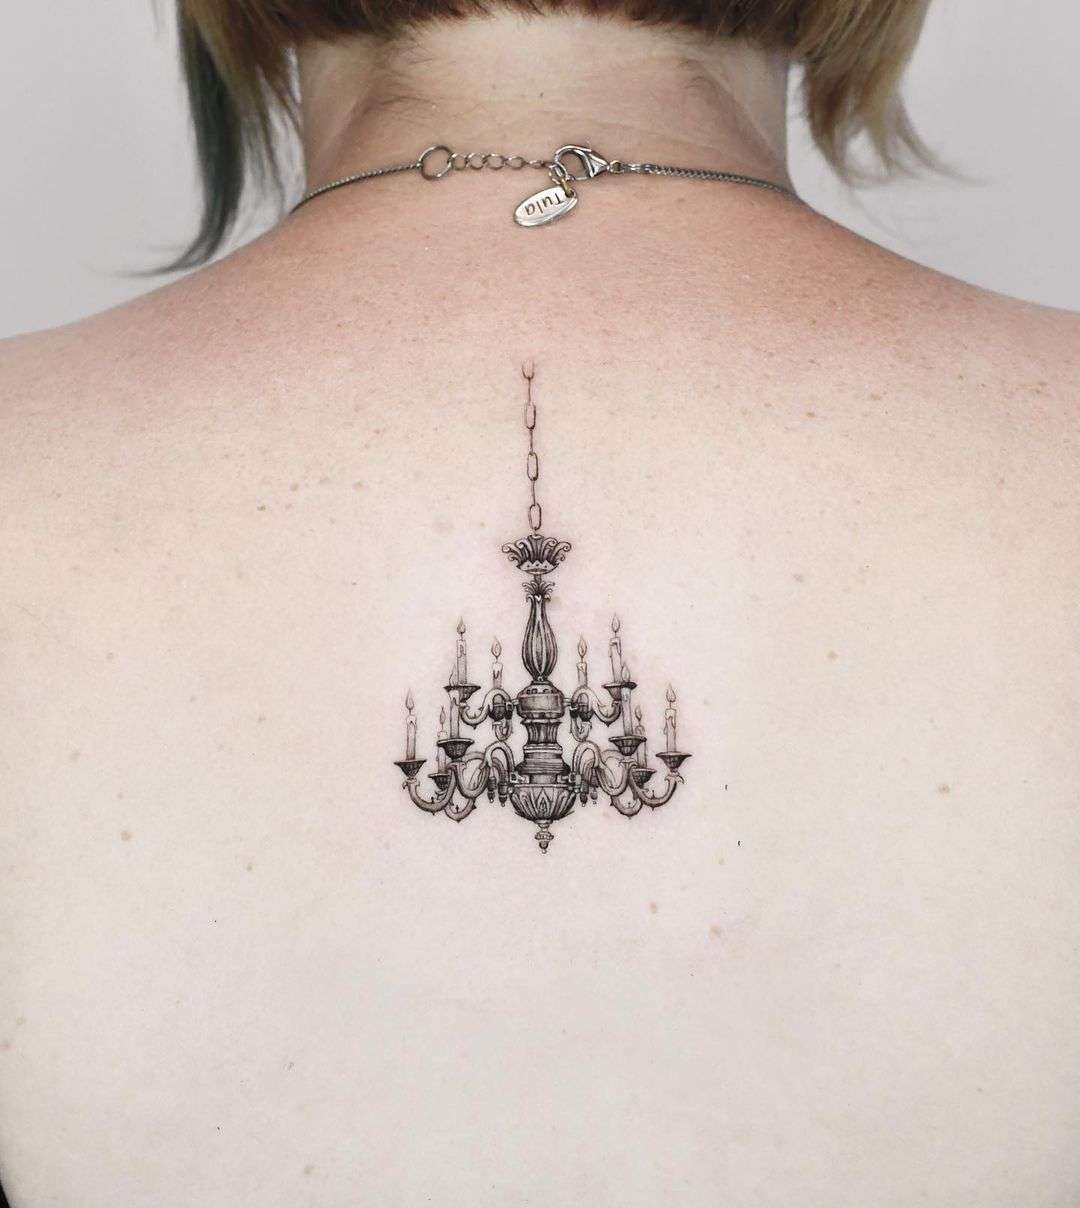 Chandelier by Edit Paints Tattoo